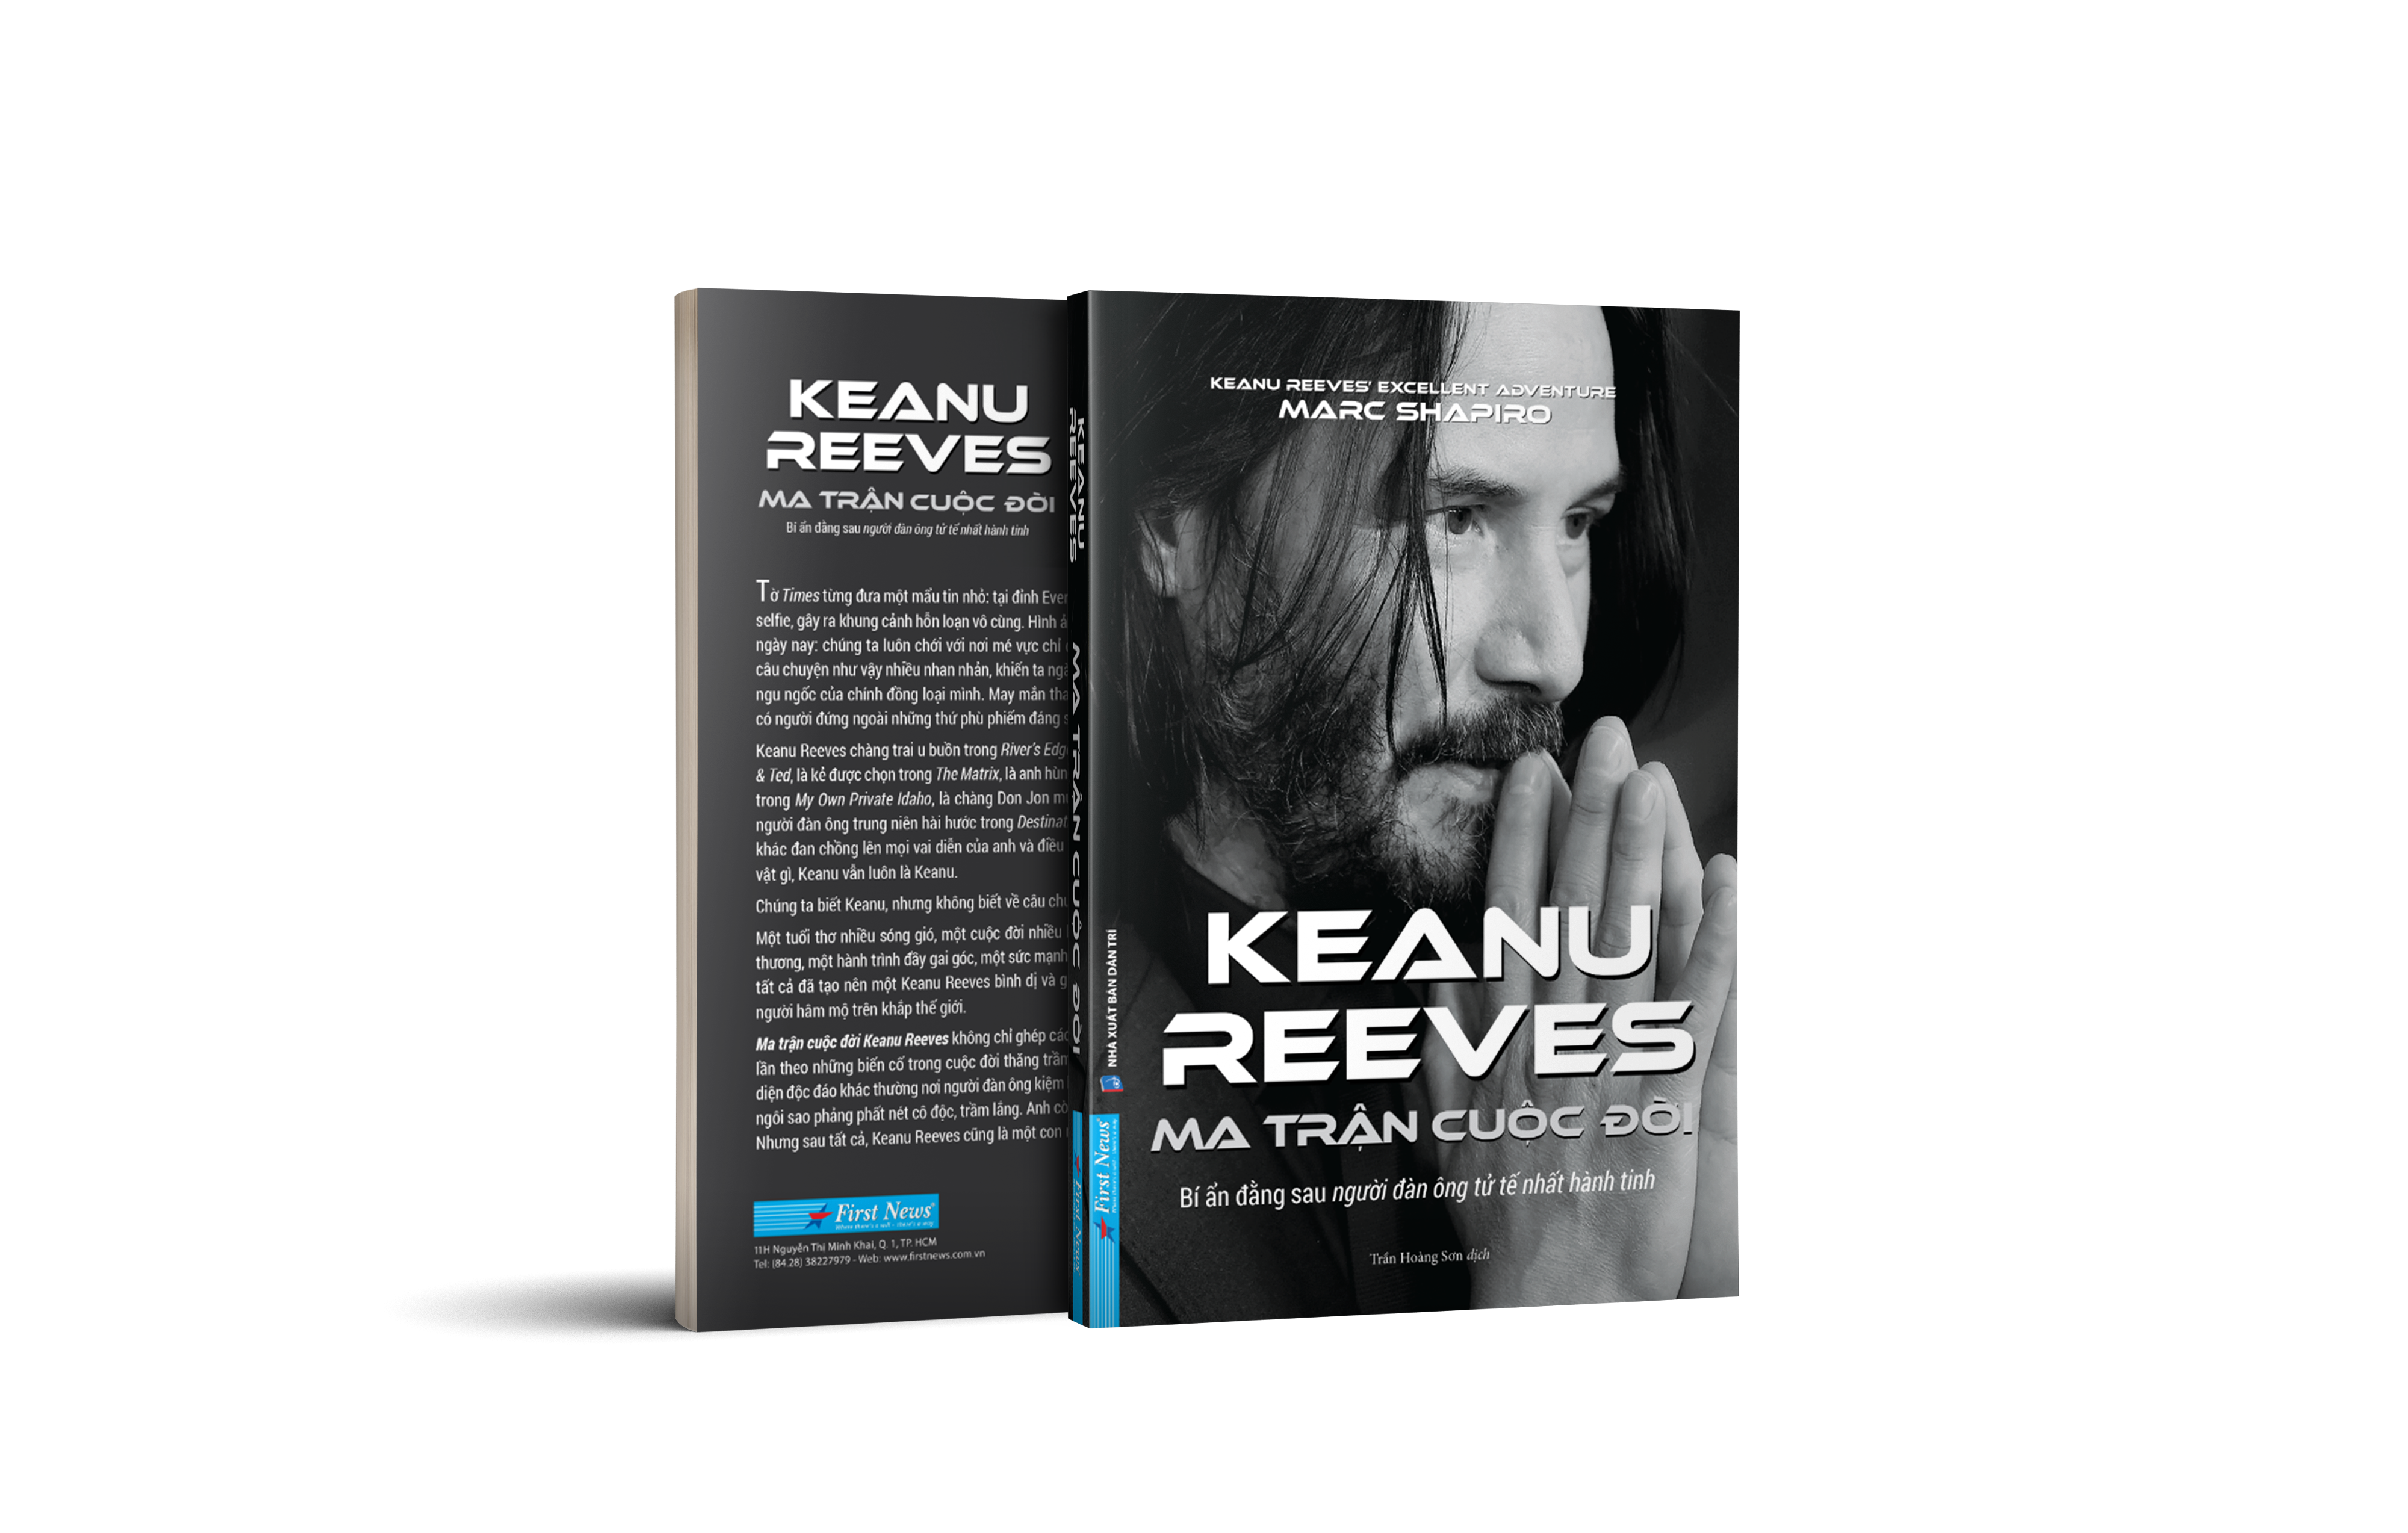 Ma Trận Cuộc Đời Keanu Reeves - Keanu Reeves’s Excellent Adventure: An Unauthorized Biography PDF